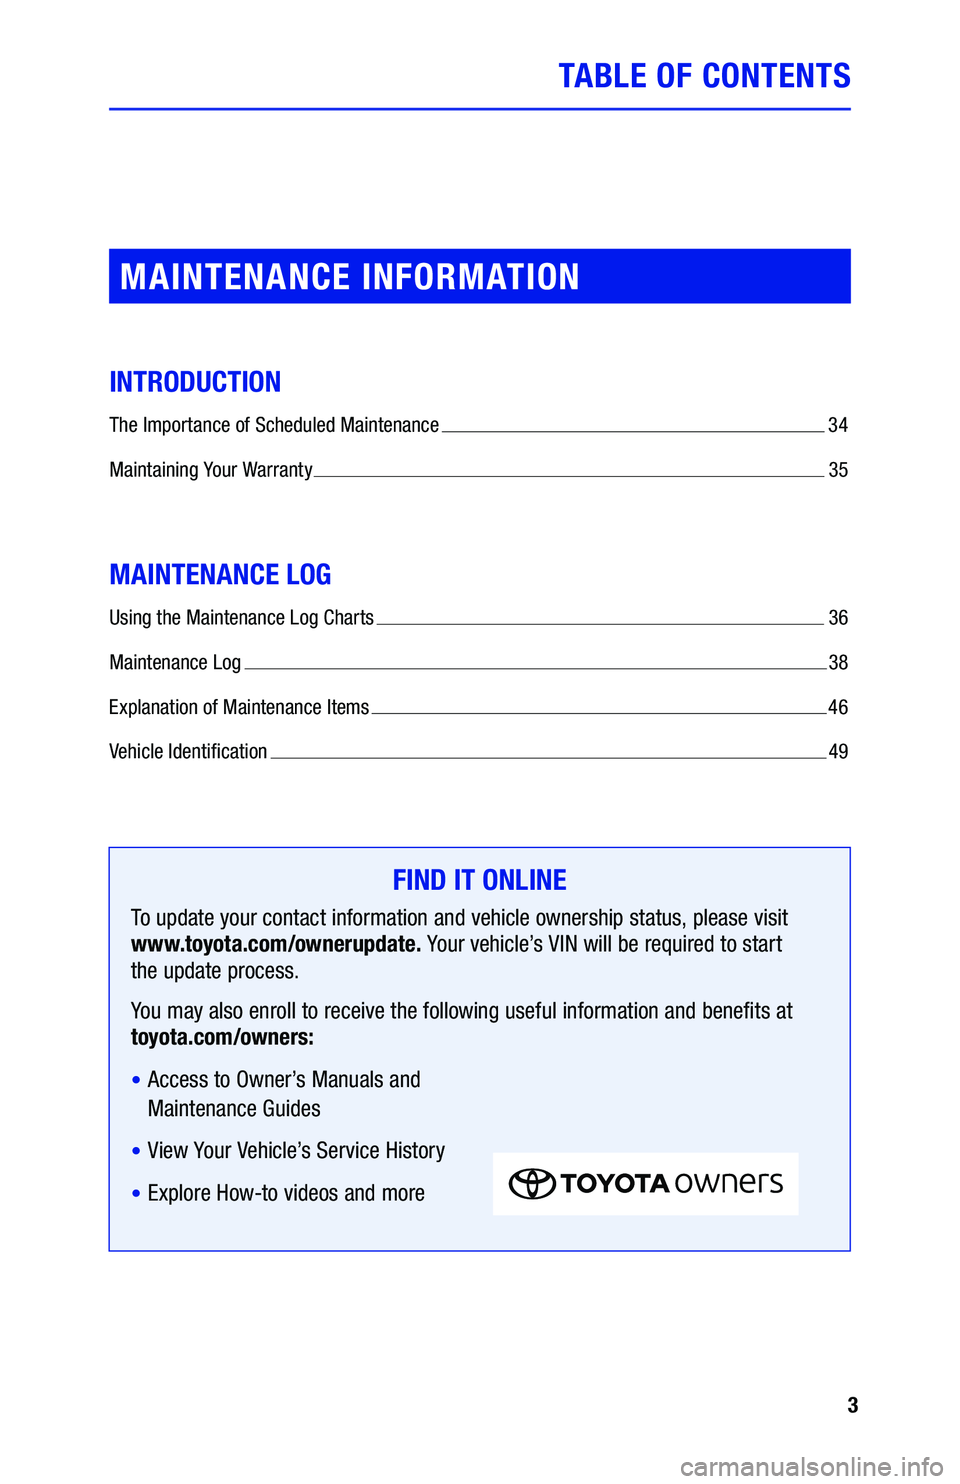 TOYOTA YARIS 2019  Warranties & Maintenance Guides (in English) 3
TABLE OF CONTENTS
MAINTENANCE INFORMATION
INTRODUCTION
The Importance of Scheduled Maintenance  34
M
aintaining Your Warranty 
 35
MAINTENANCE LOG
Using the Maintenance Log Charts  36
M
aintenance L